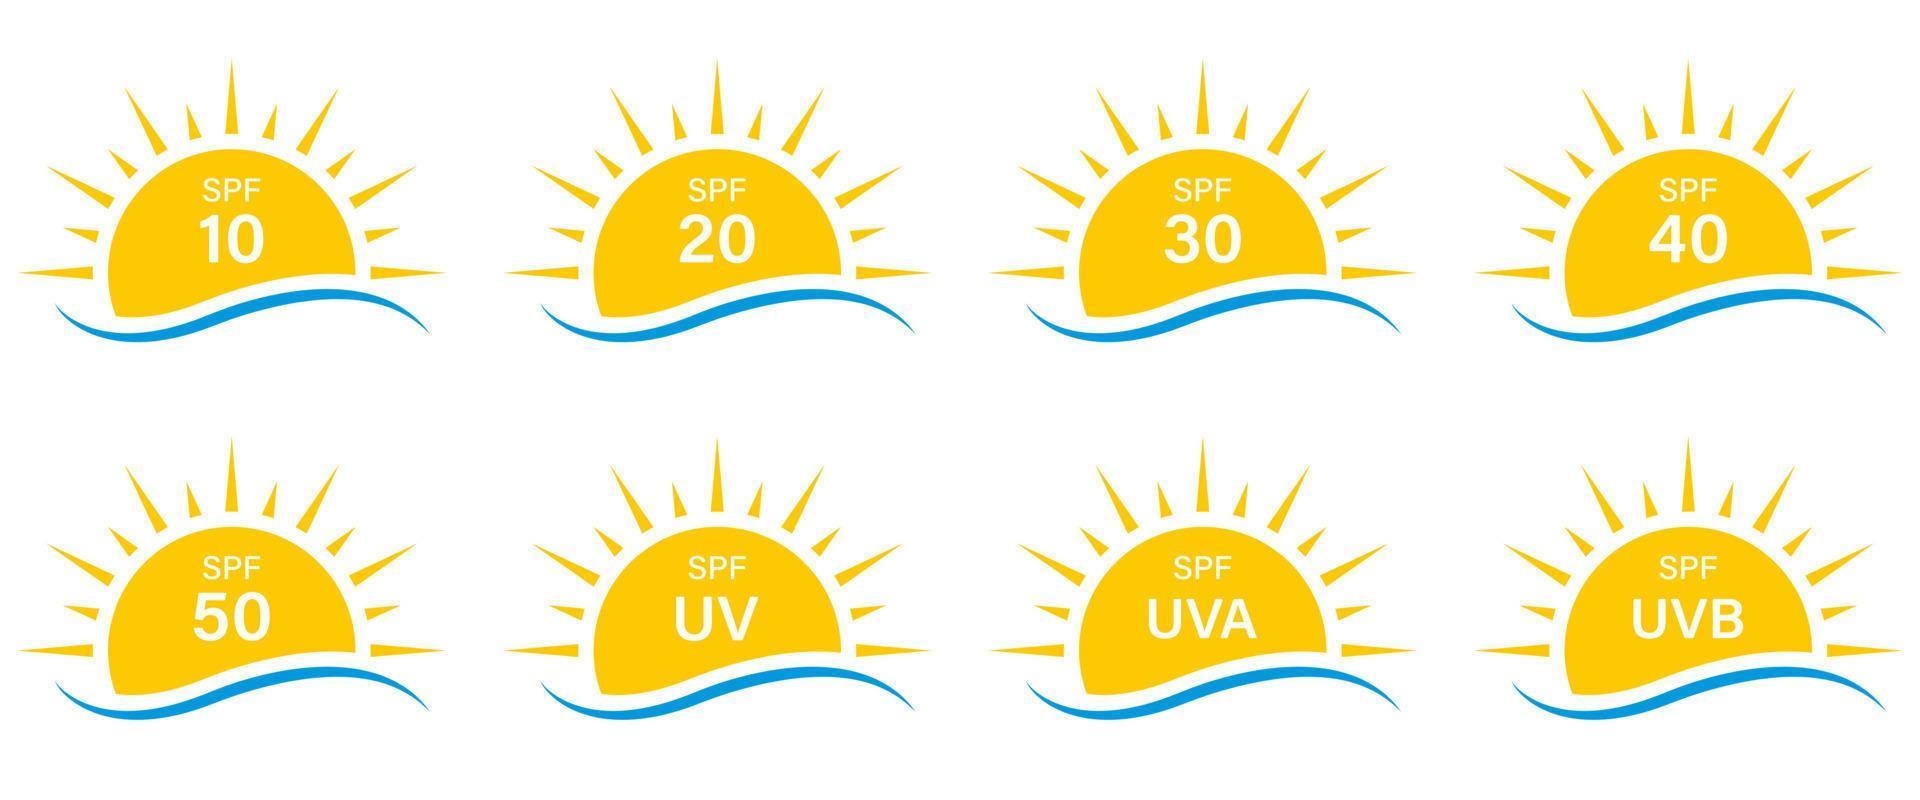 Sun UV Rays SPF 50 40 30 20 10 Protect Radiation Silhouette Icon Set. Summer Sunblock Protection Ultraviolet Rays UVA UVB Defense Skin Glyph Pictogram. Icon. Isolated Vector Illustration